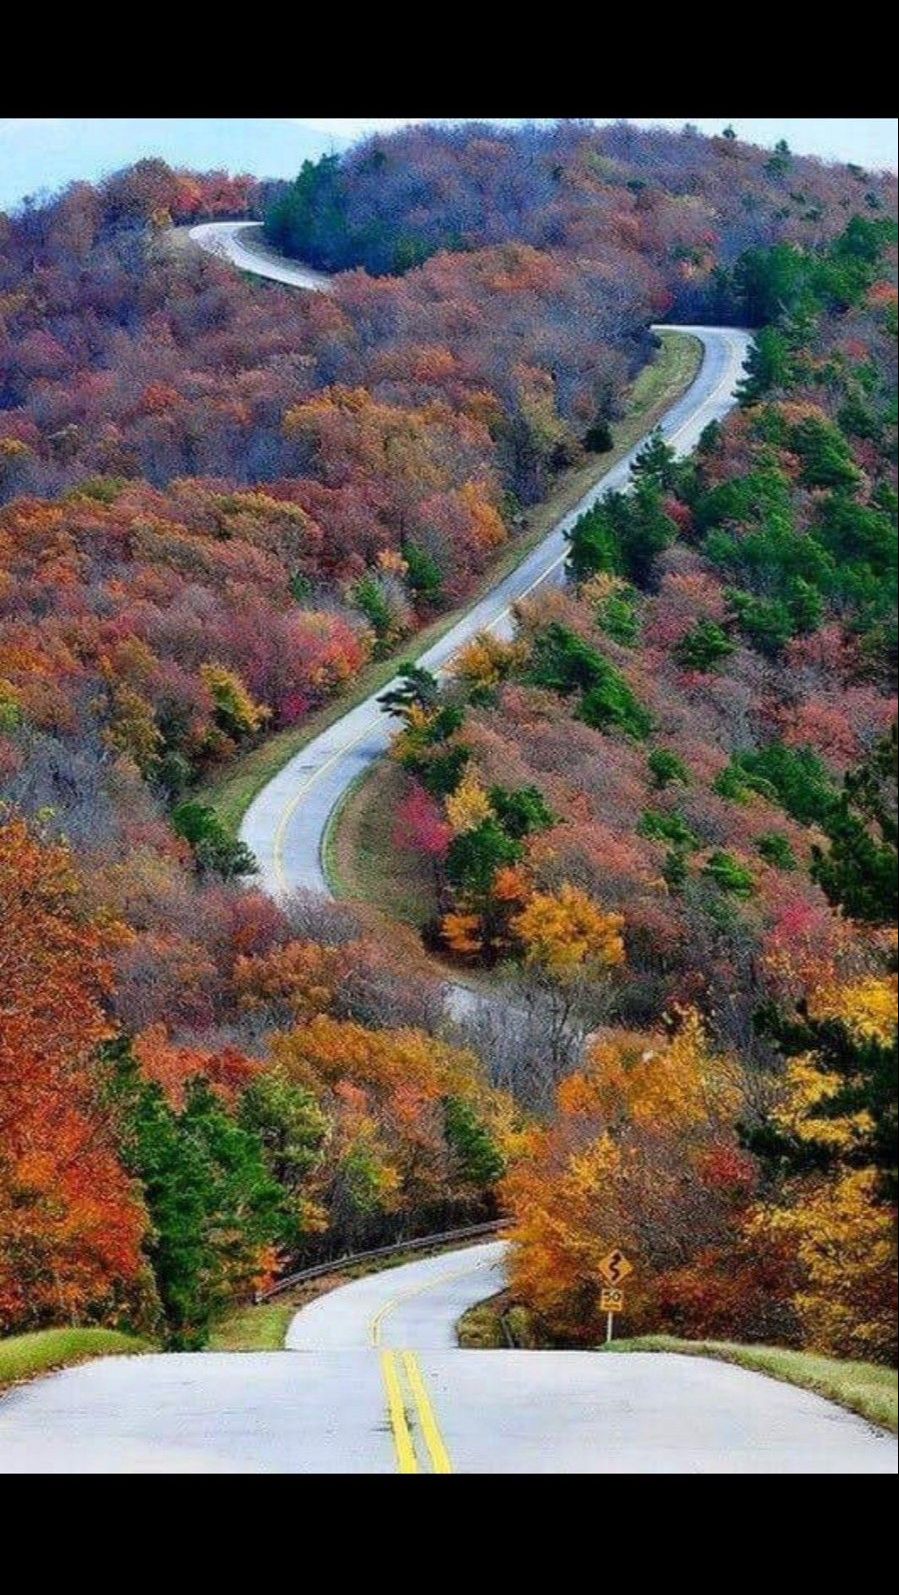 3. Talimena National Scenic Byway: Journey through Nature's Palette<br /><br
/>The Talimena National Scenic Byway is a must for those seeking a picturesque drive. It stretches across the Ouachita Mountains. This 54-mile drive offers panoramic vistas and rich greenery in the fall.<br
/><br
/>Photo: pinterest_i.pinimg